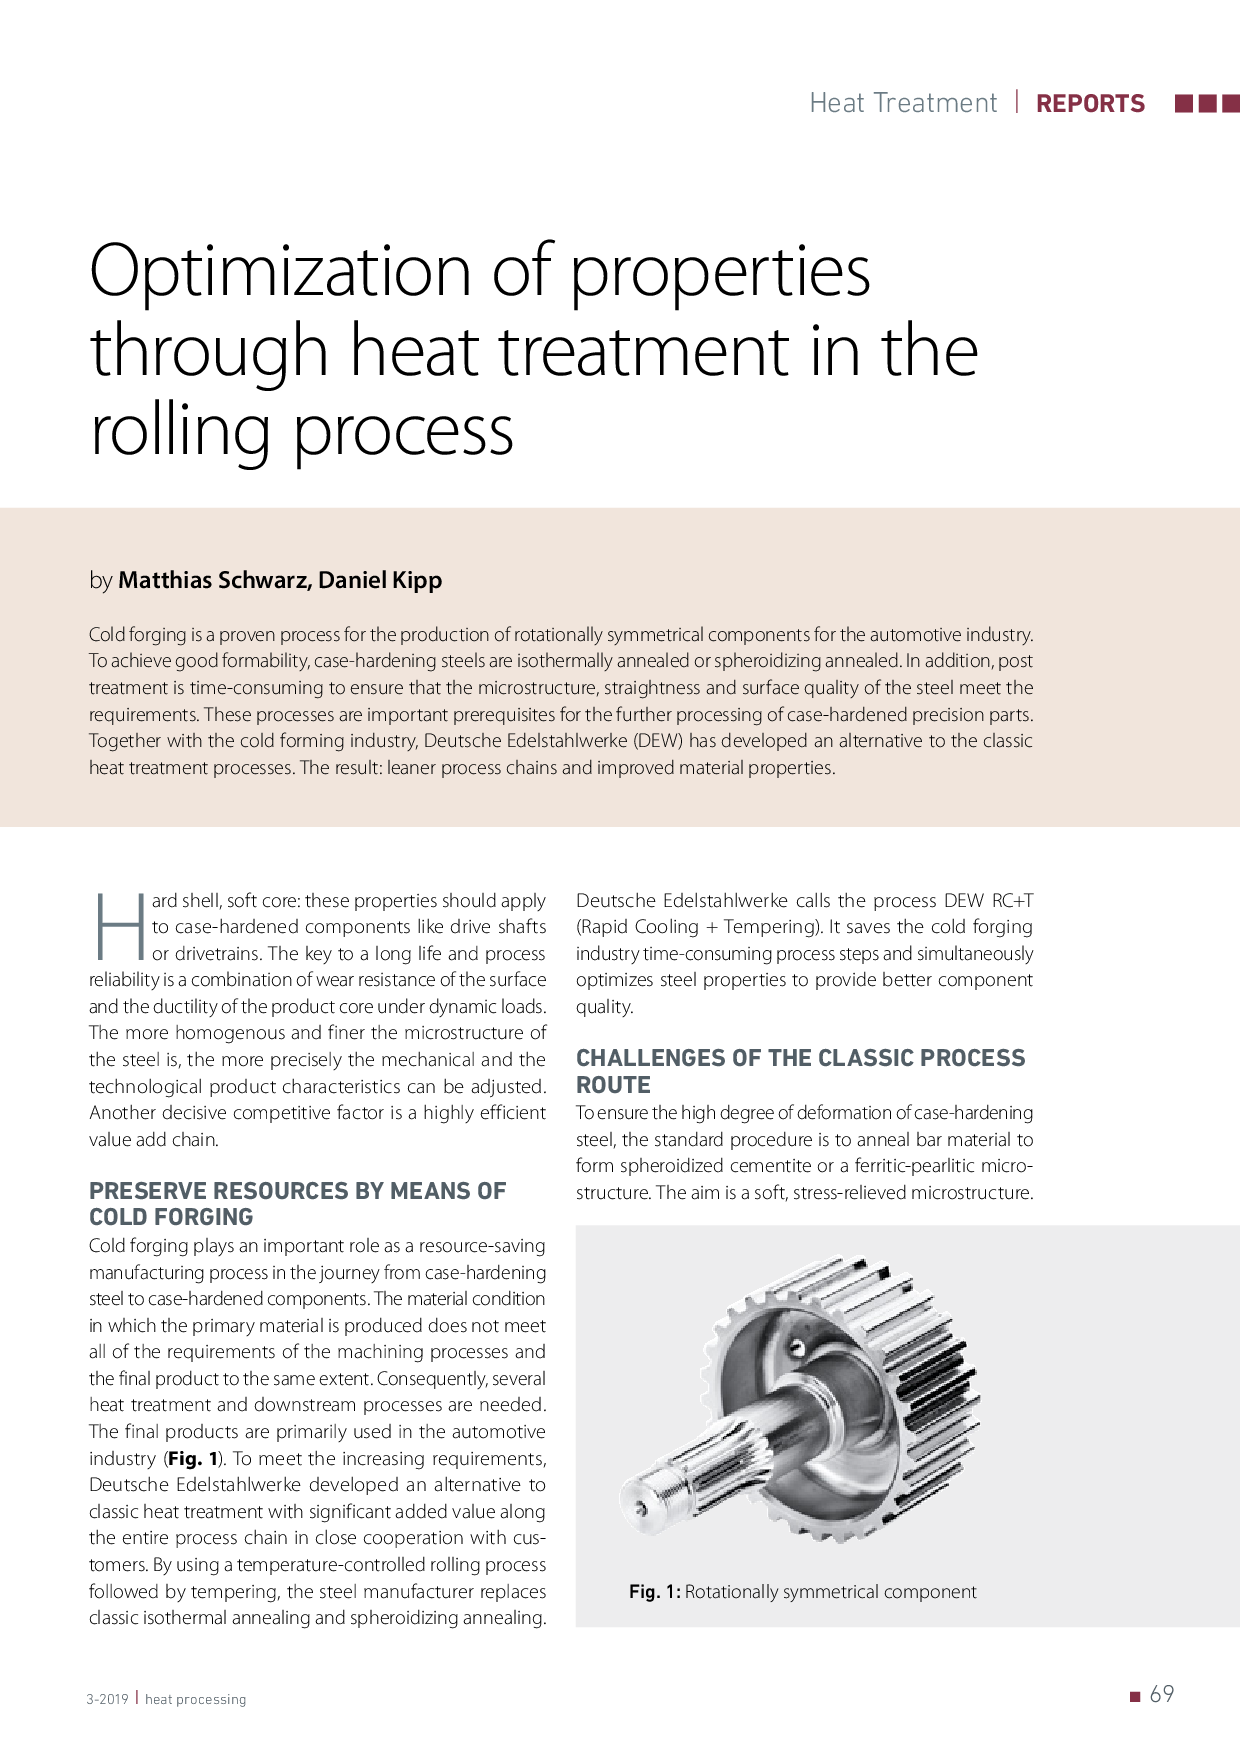 Optimization of properties through heat treatment in the rolling process